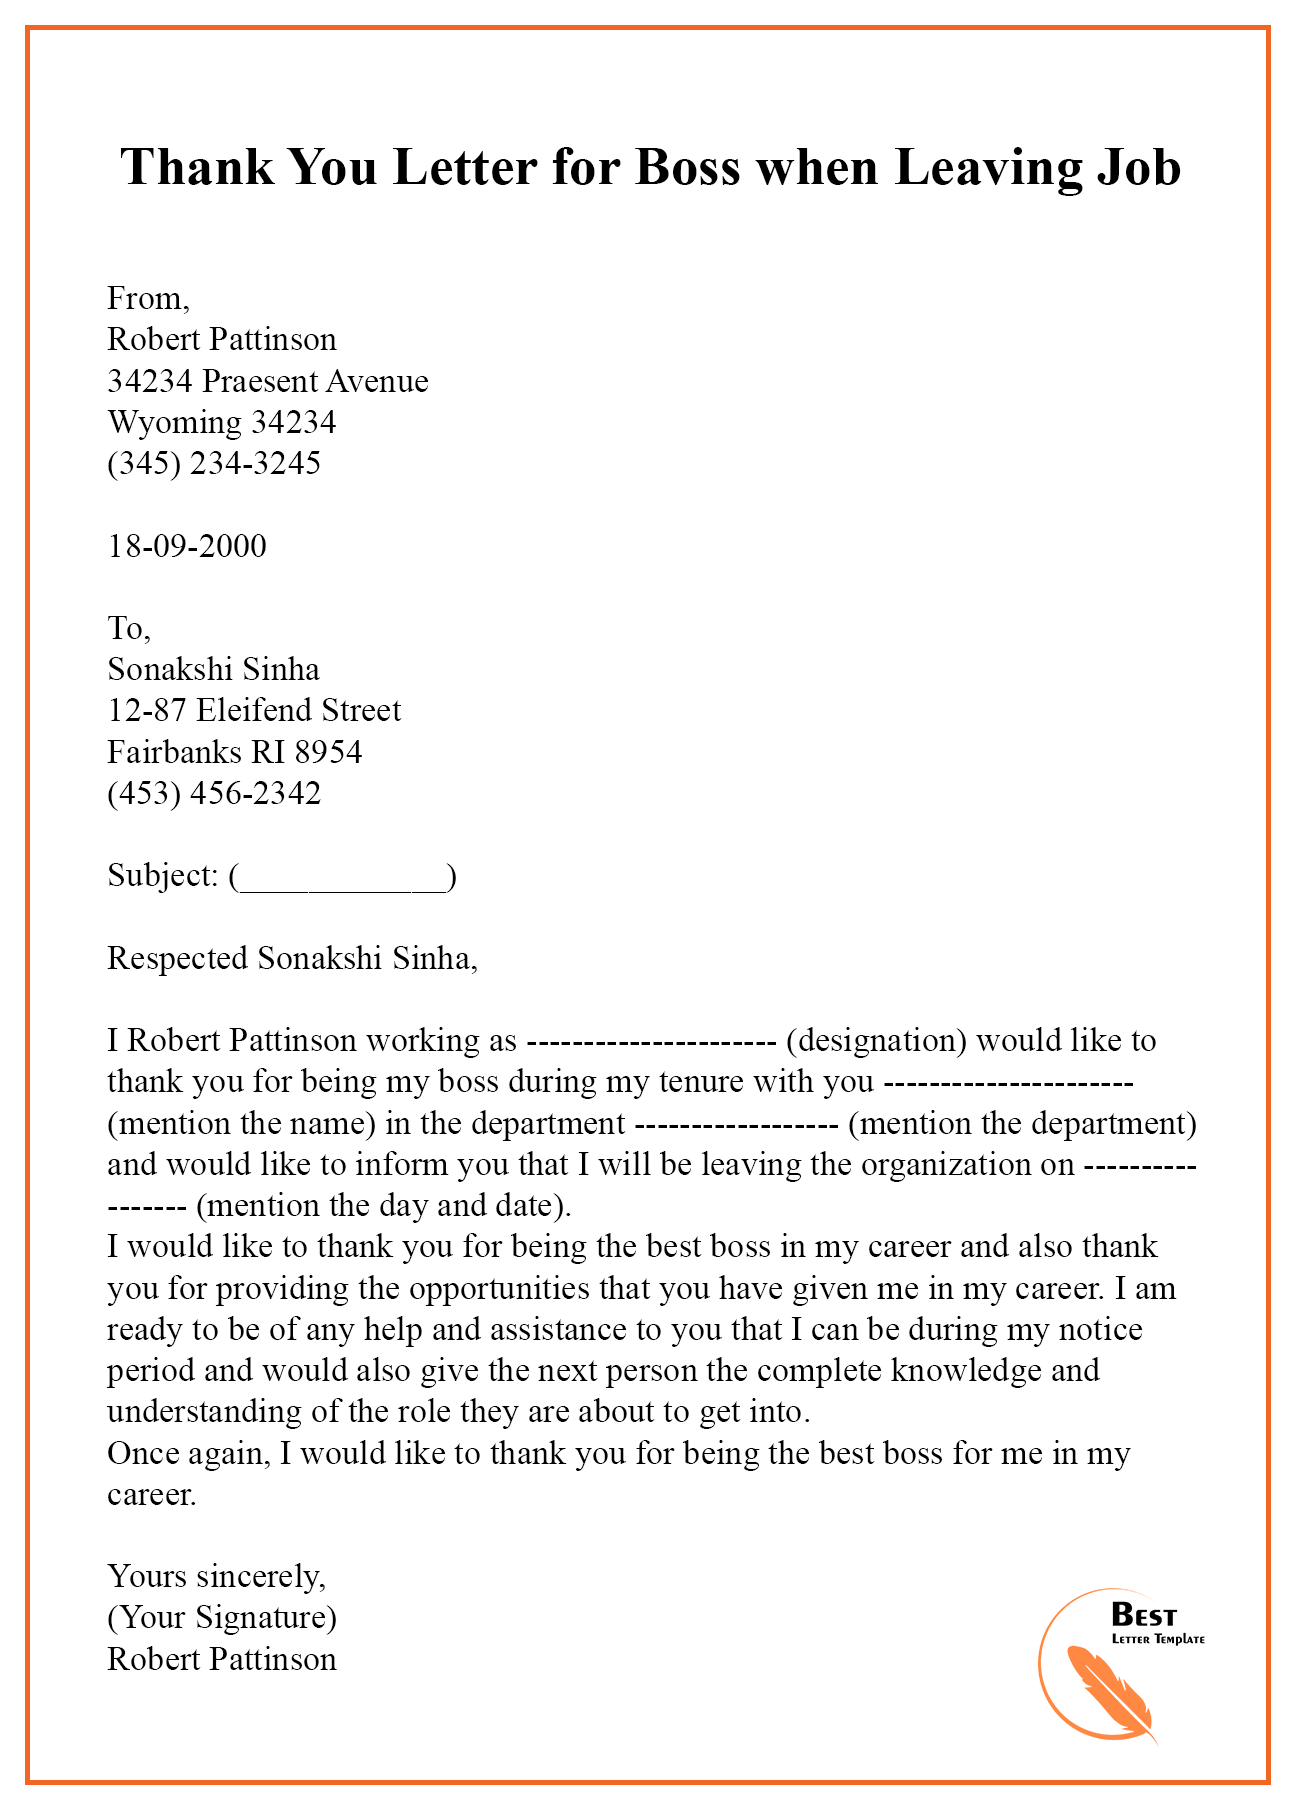 Thank You Letter For Manager from bestlettertemplate.com